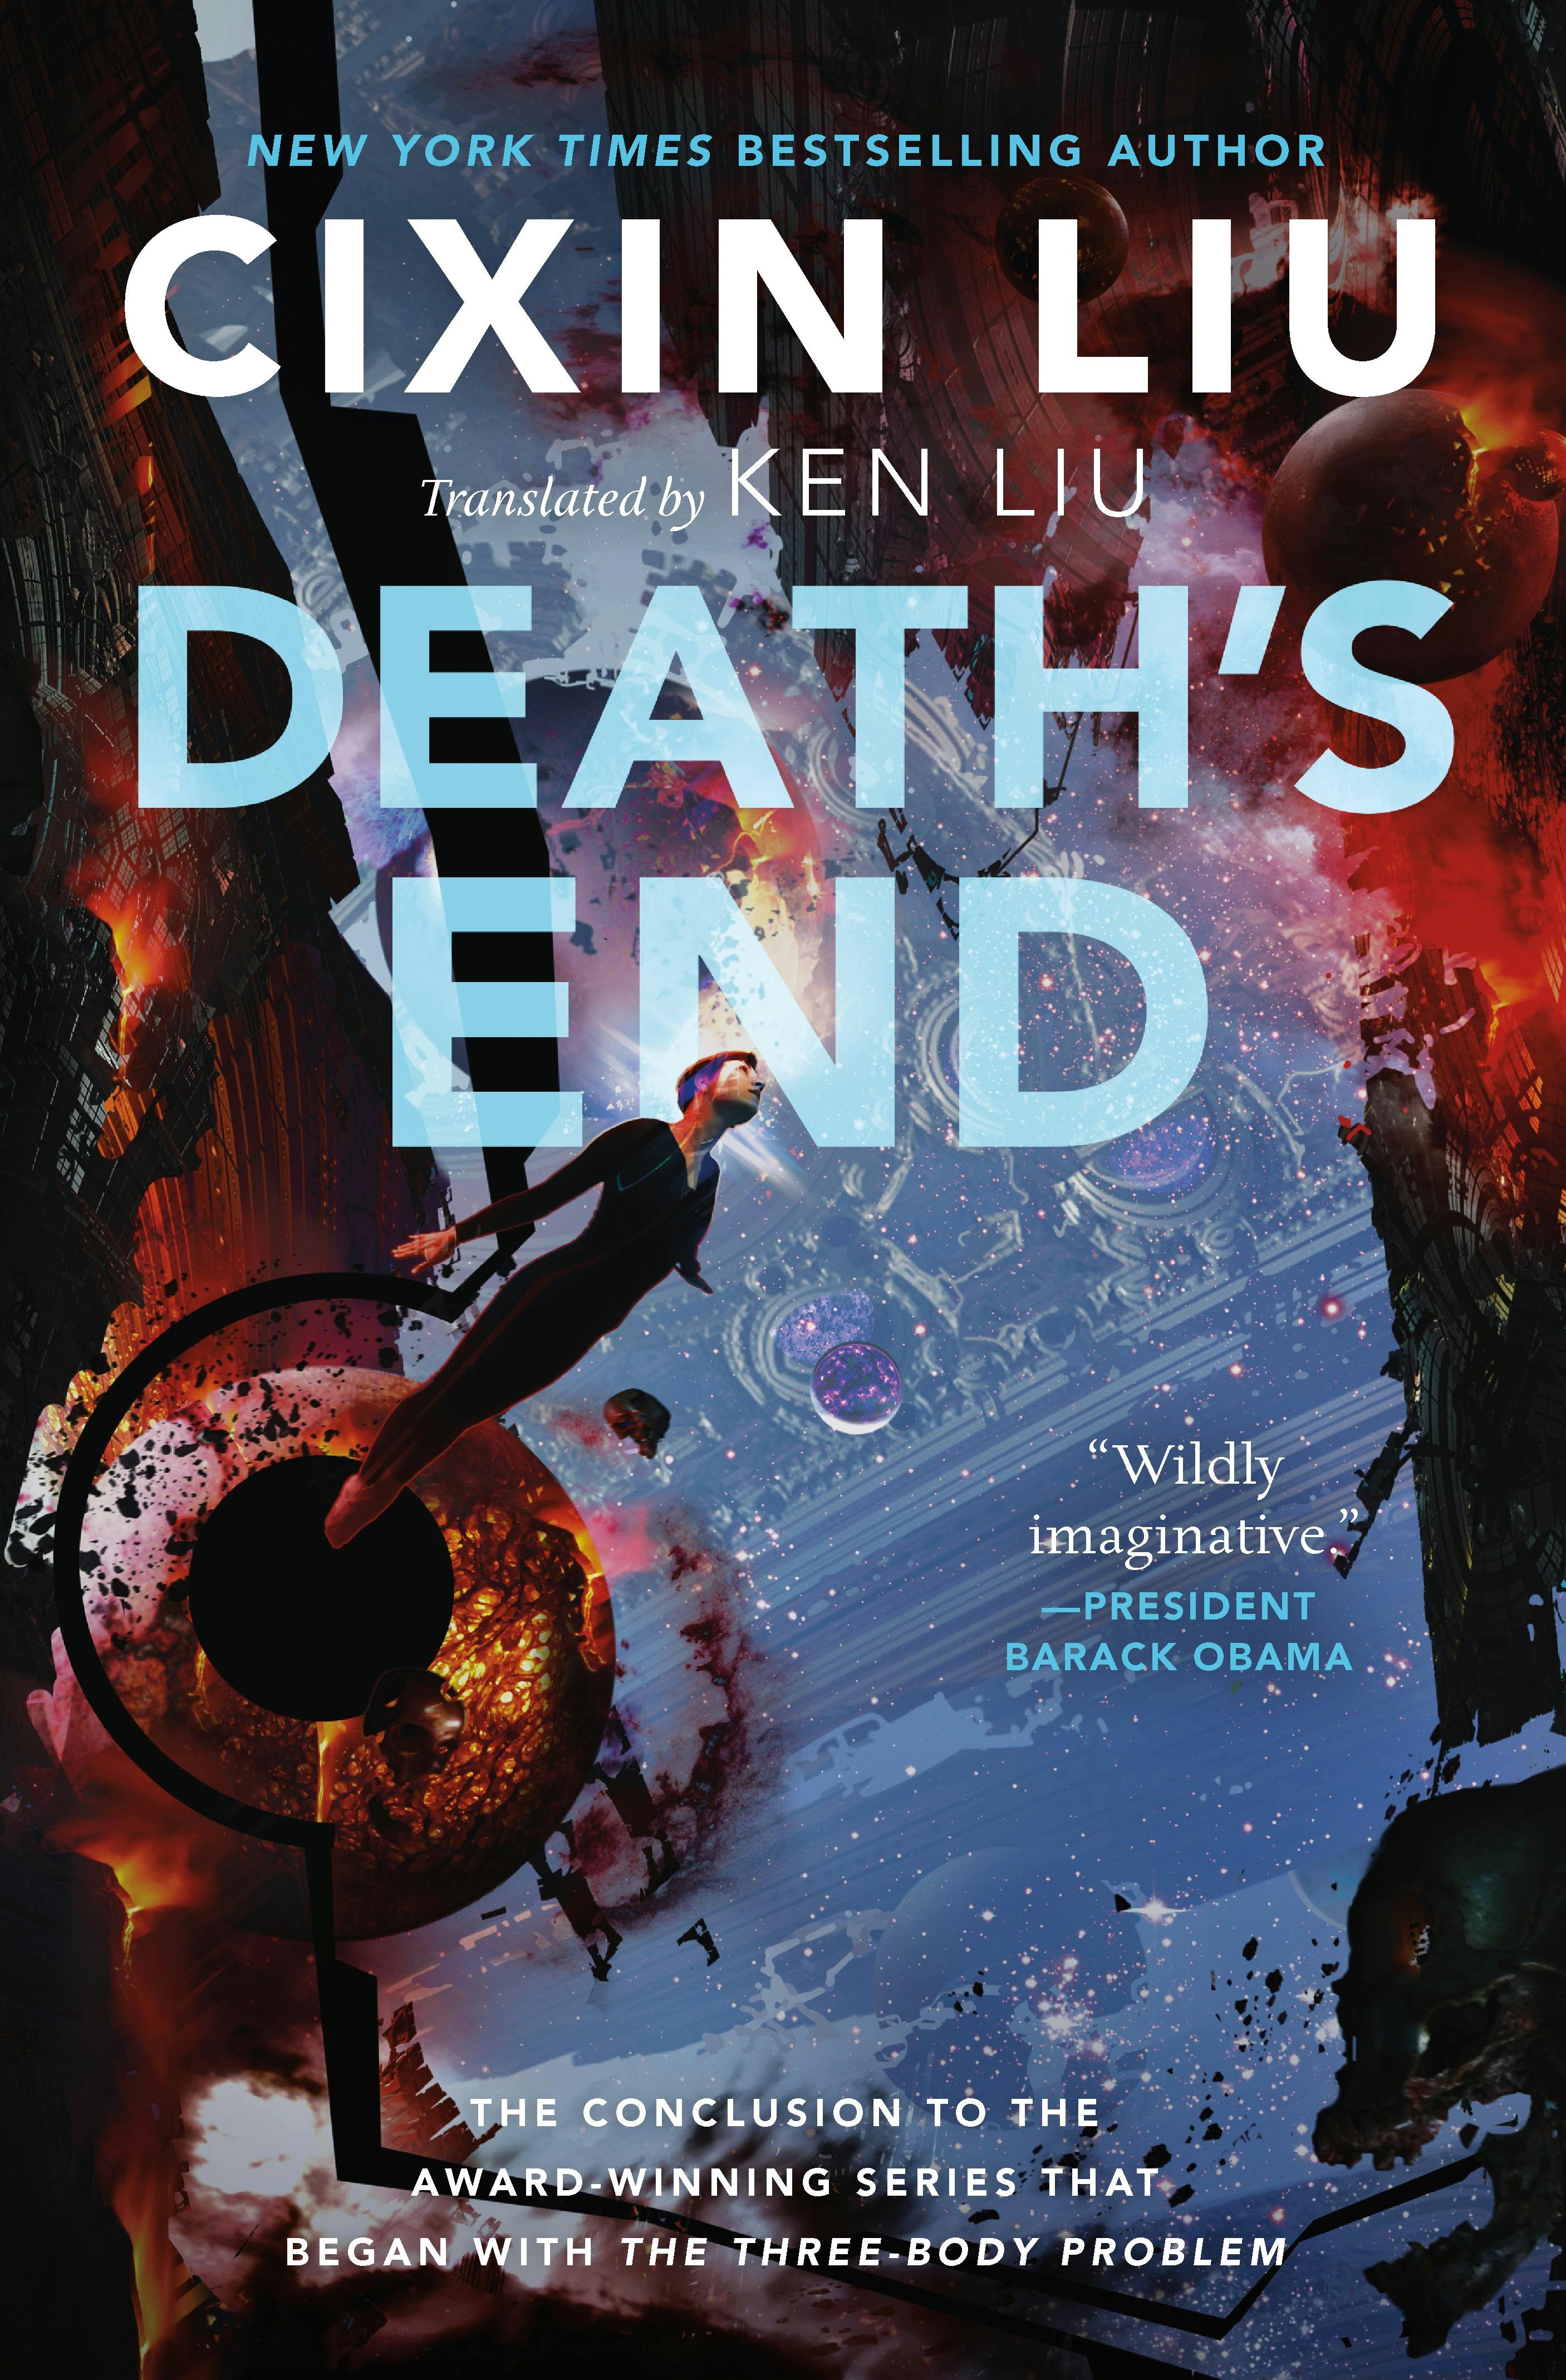 Cover for the book titled as: Death's End